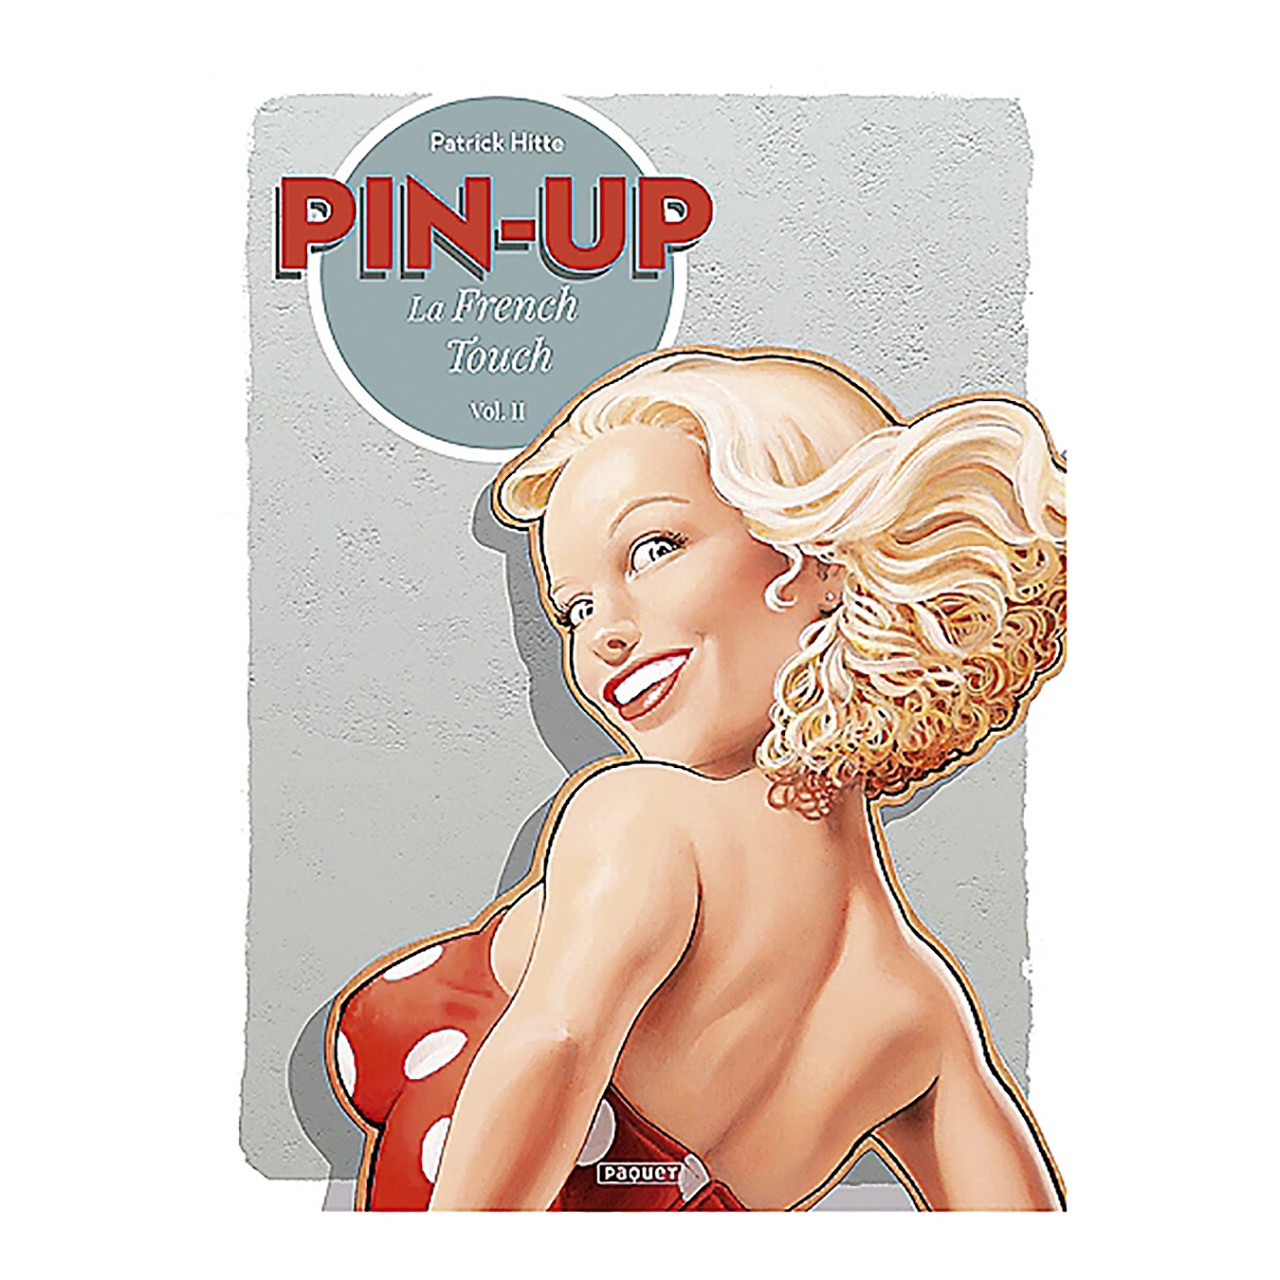 Pin-up La French touch tome 2